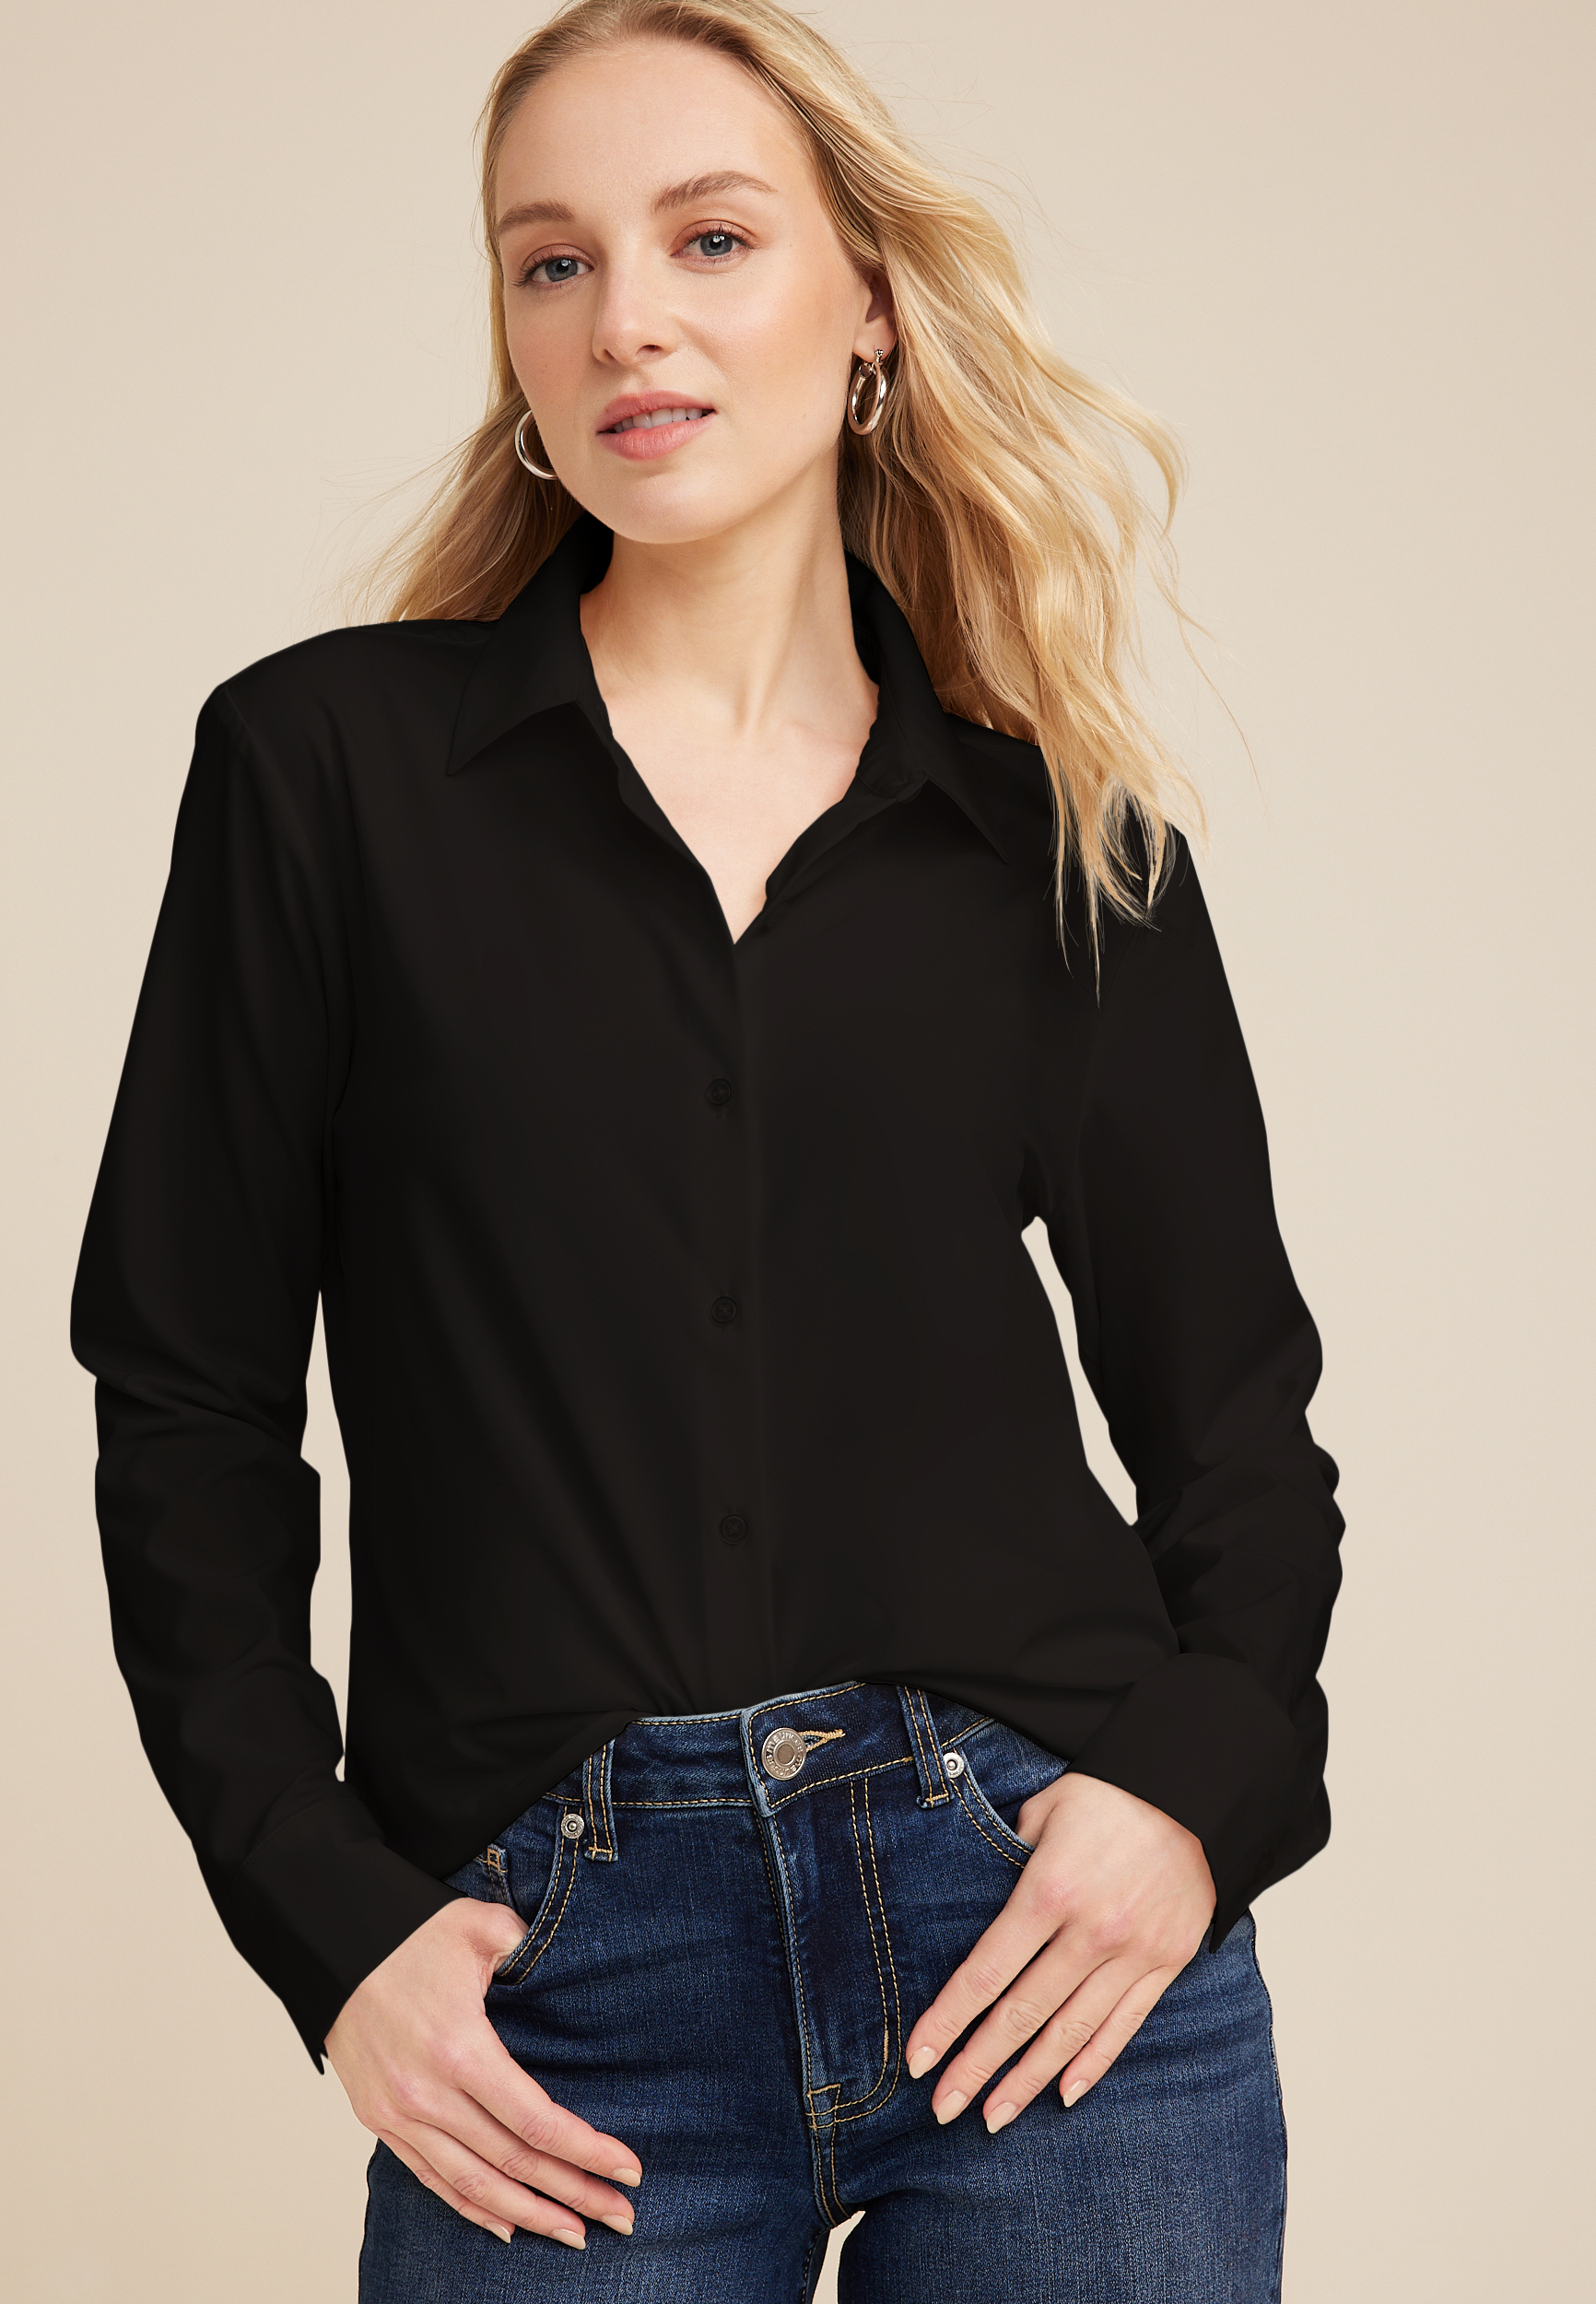 Women\'s Shirts & & Blouses: Peasant | Floral, Flowy, maurices More